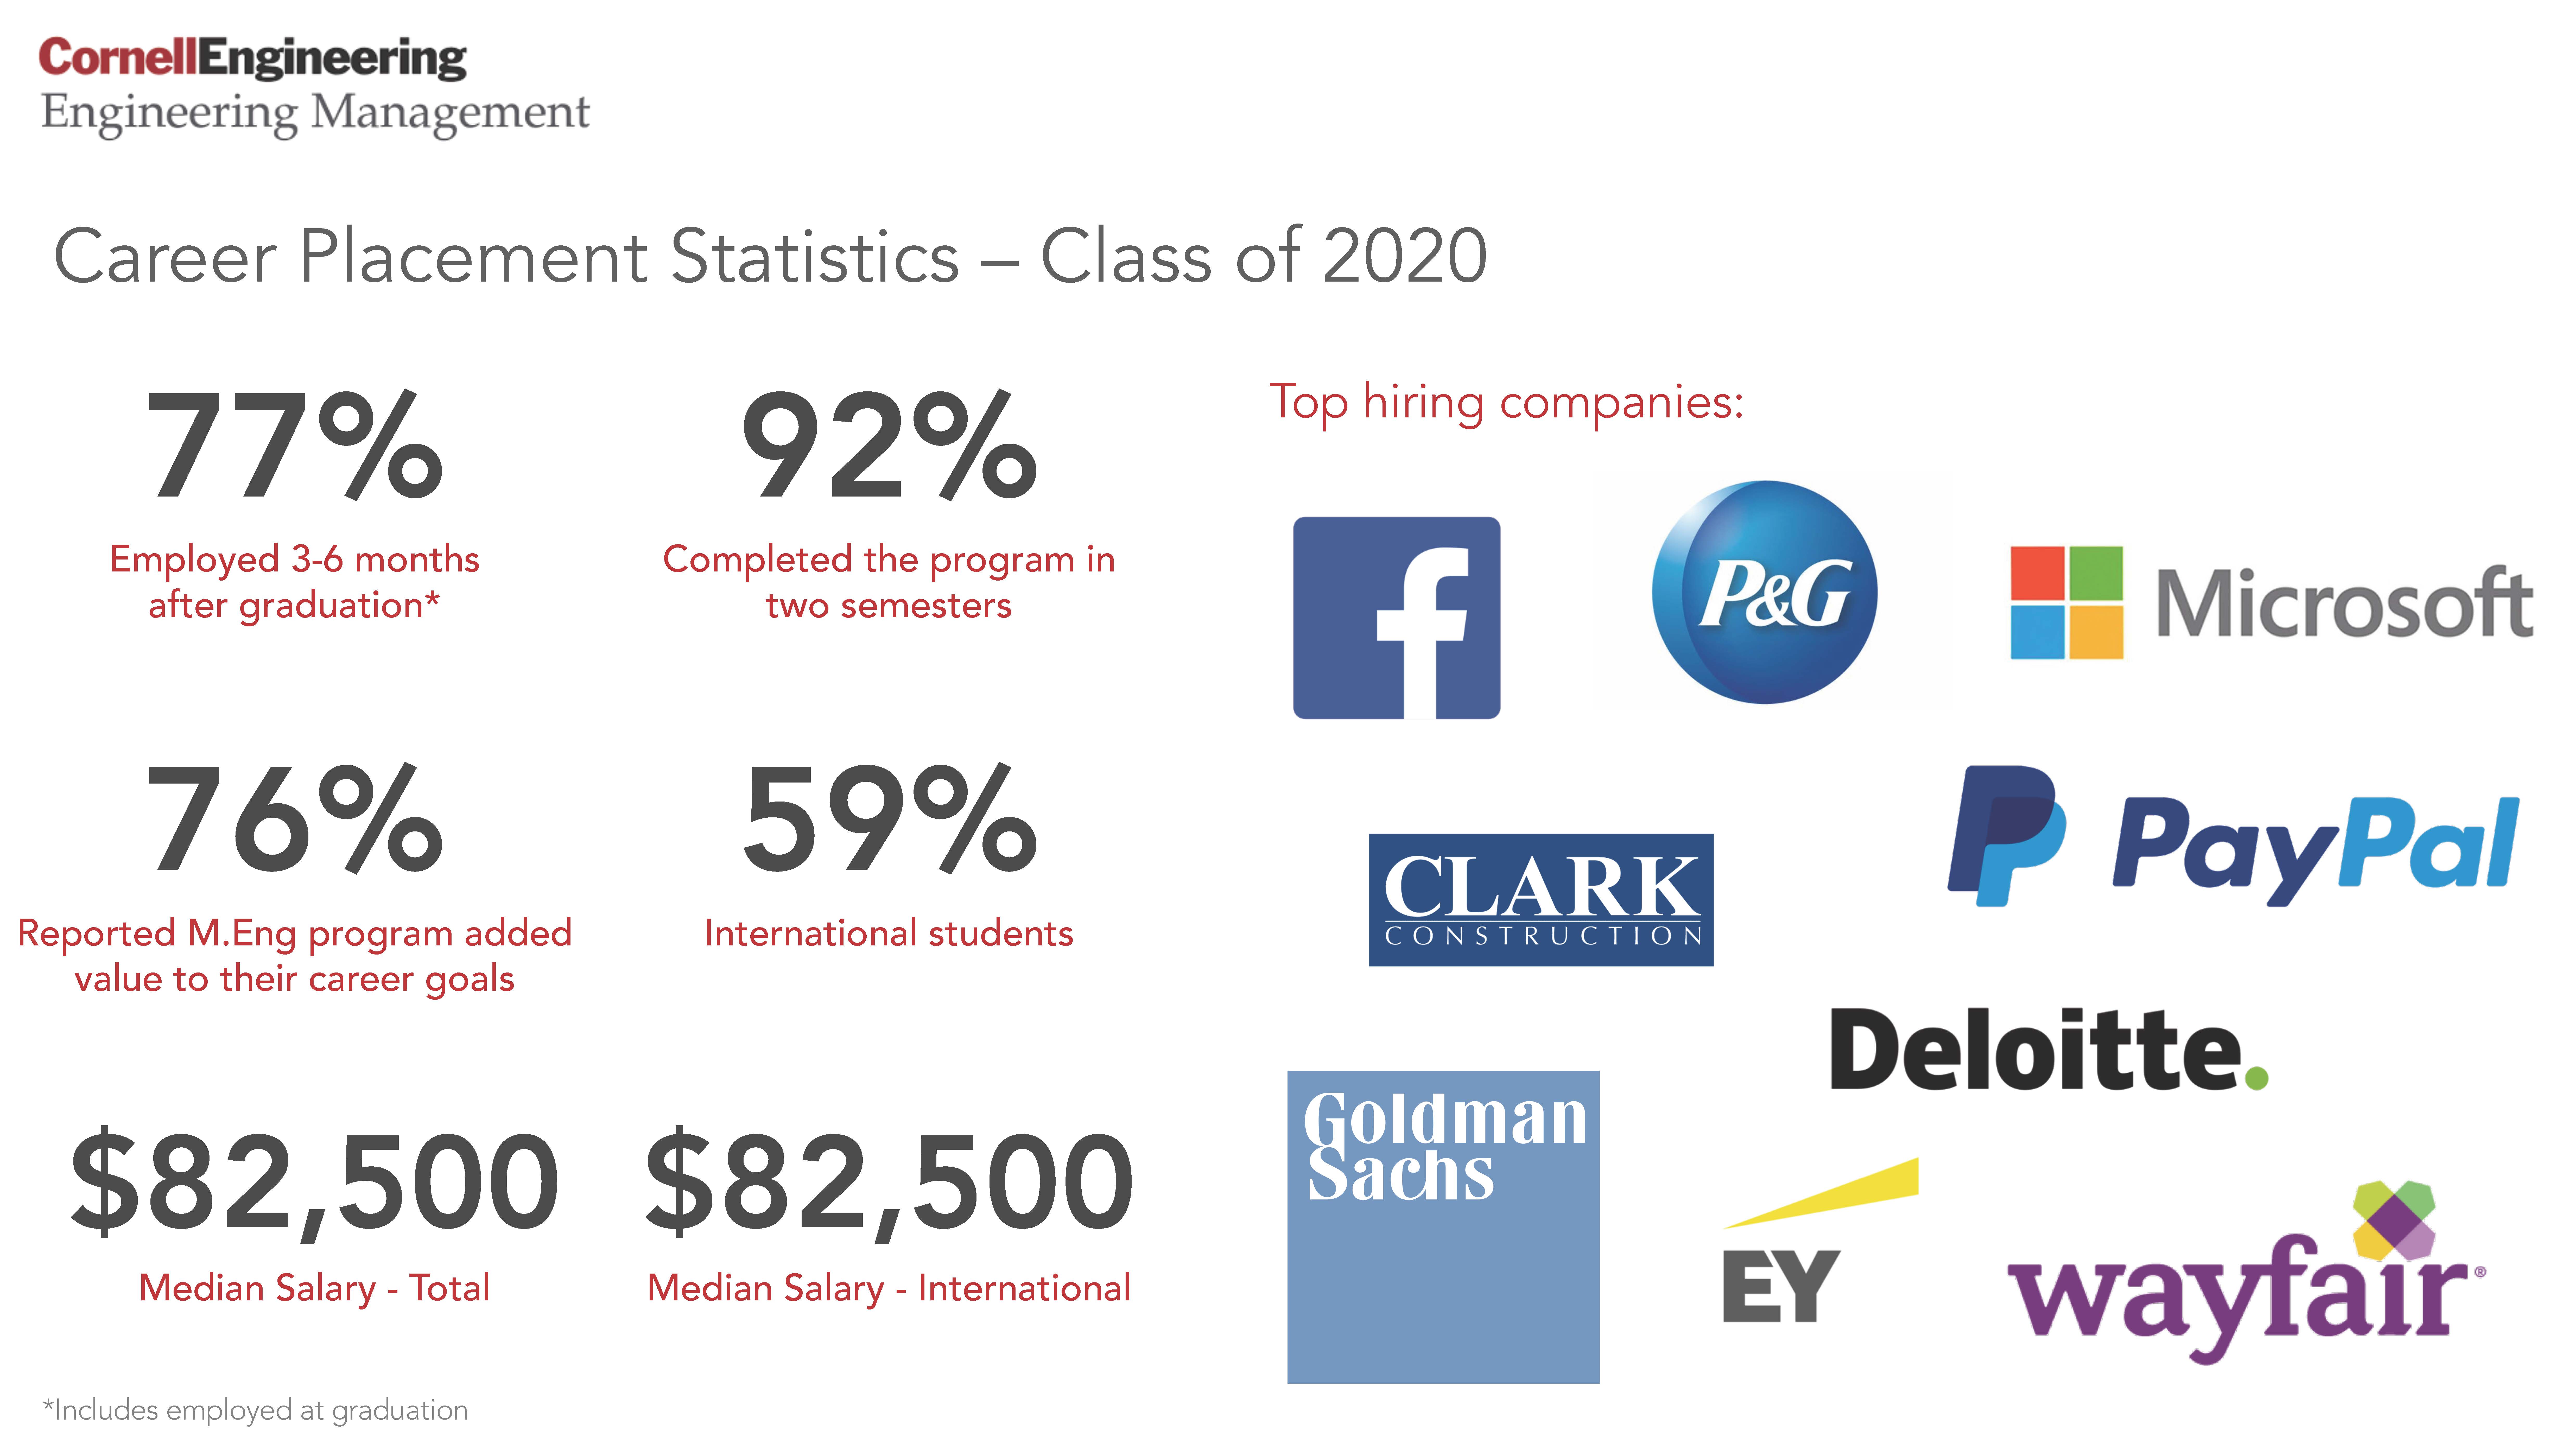 2020 Career Data:   77% Employed 3-6 months after graduation* 92% Completed the program in two semesters 76% Reported M.Eng. program added value to their career goals 59% International students $82,500 Median Salary – Total $82,500 Median Salary – International *Includes employed at graduation, data incomplete for 3-6 months after graduation   Top hiring companies Clark Construction Deloitte EY Facebook Goldman Sachs Microsoft PayPal Procter & Gamble Wayfair logos